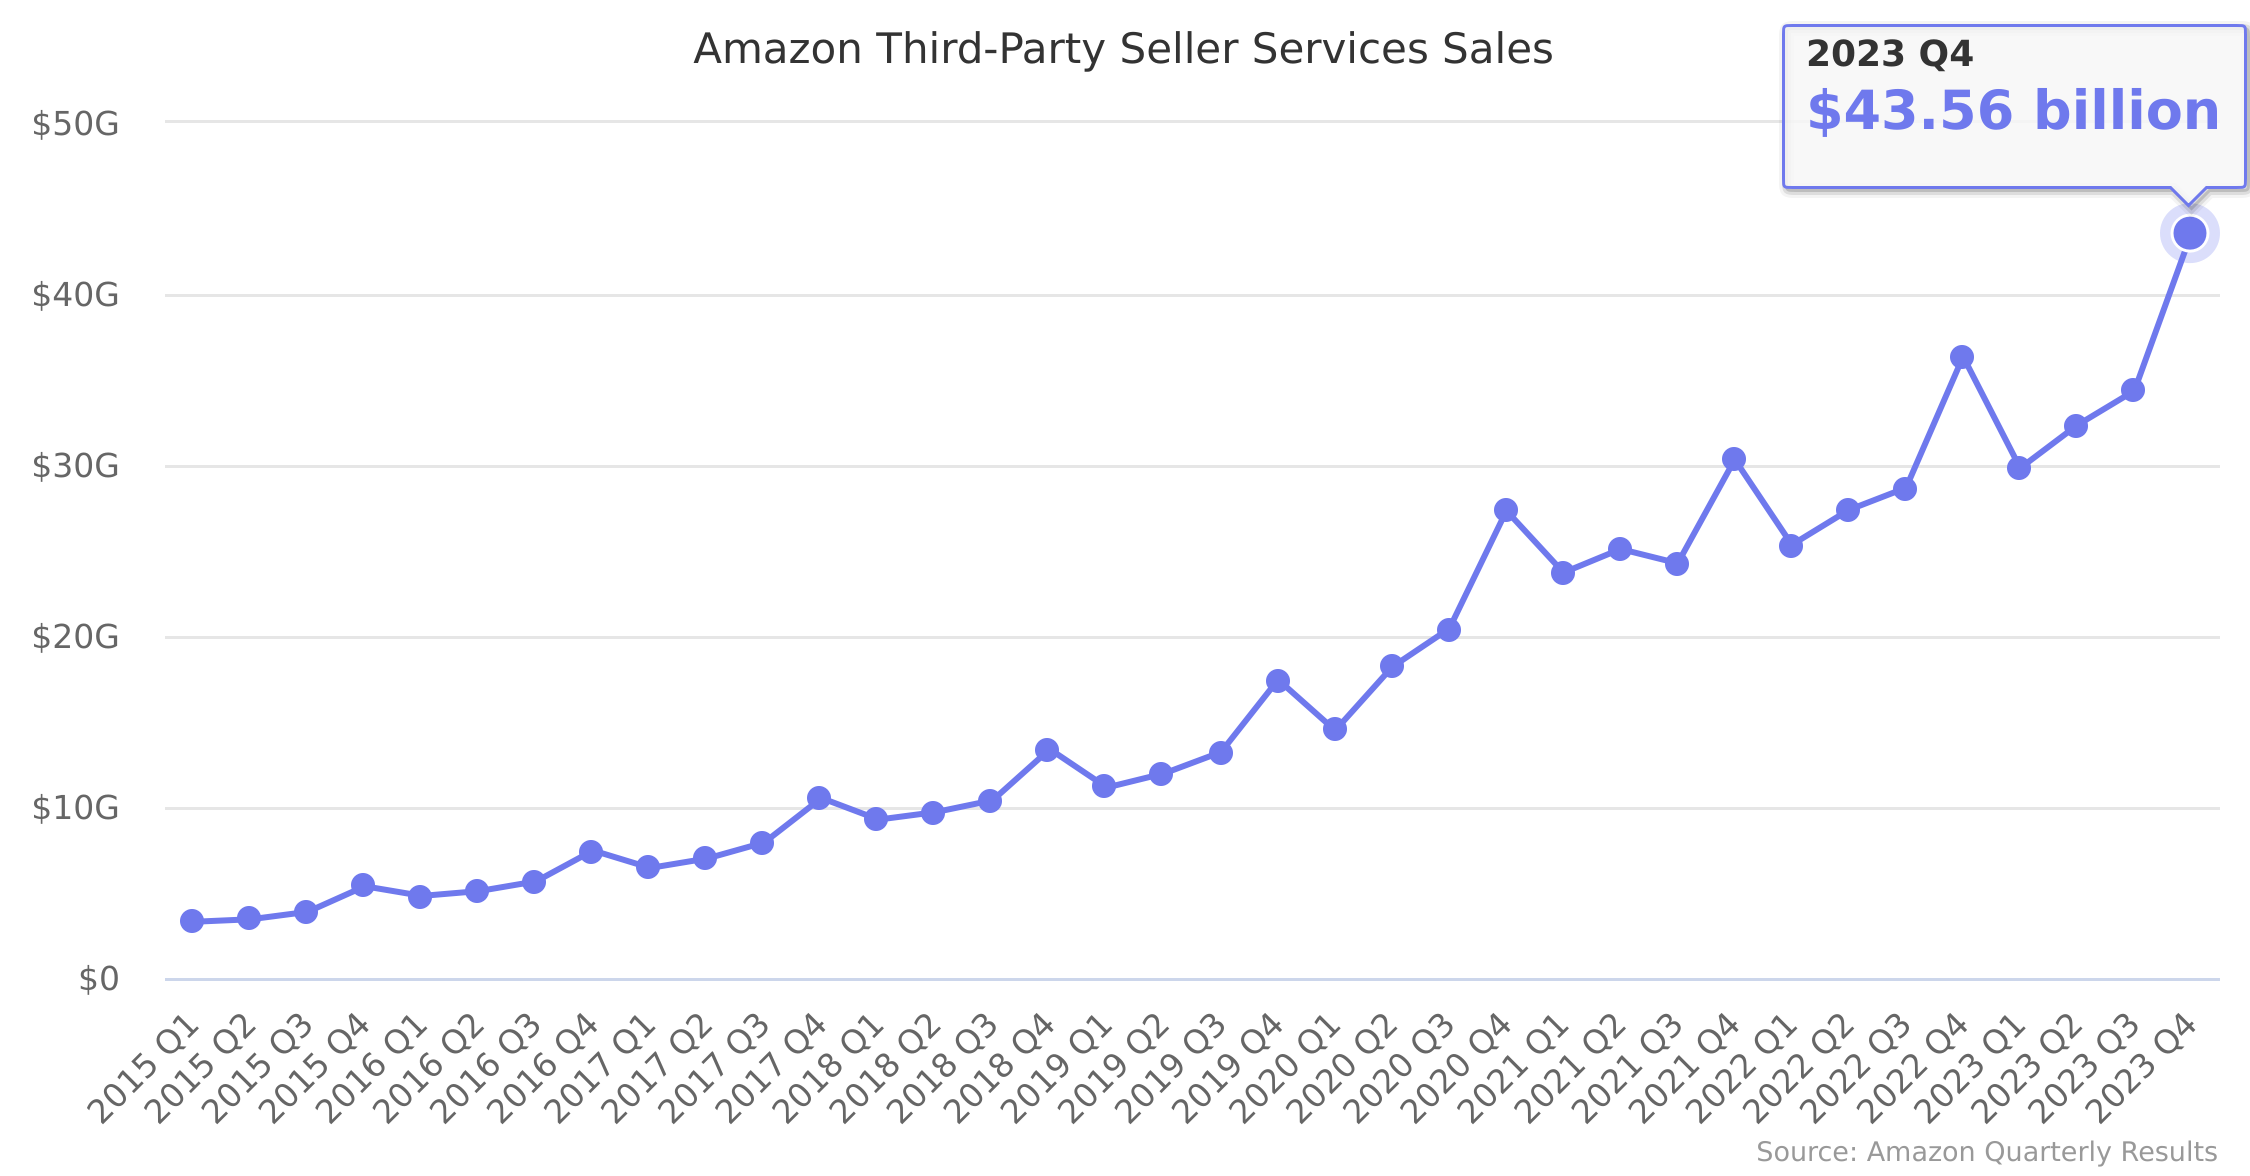 Amazon Third-Party Seller Services Sales